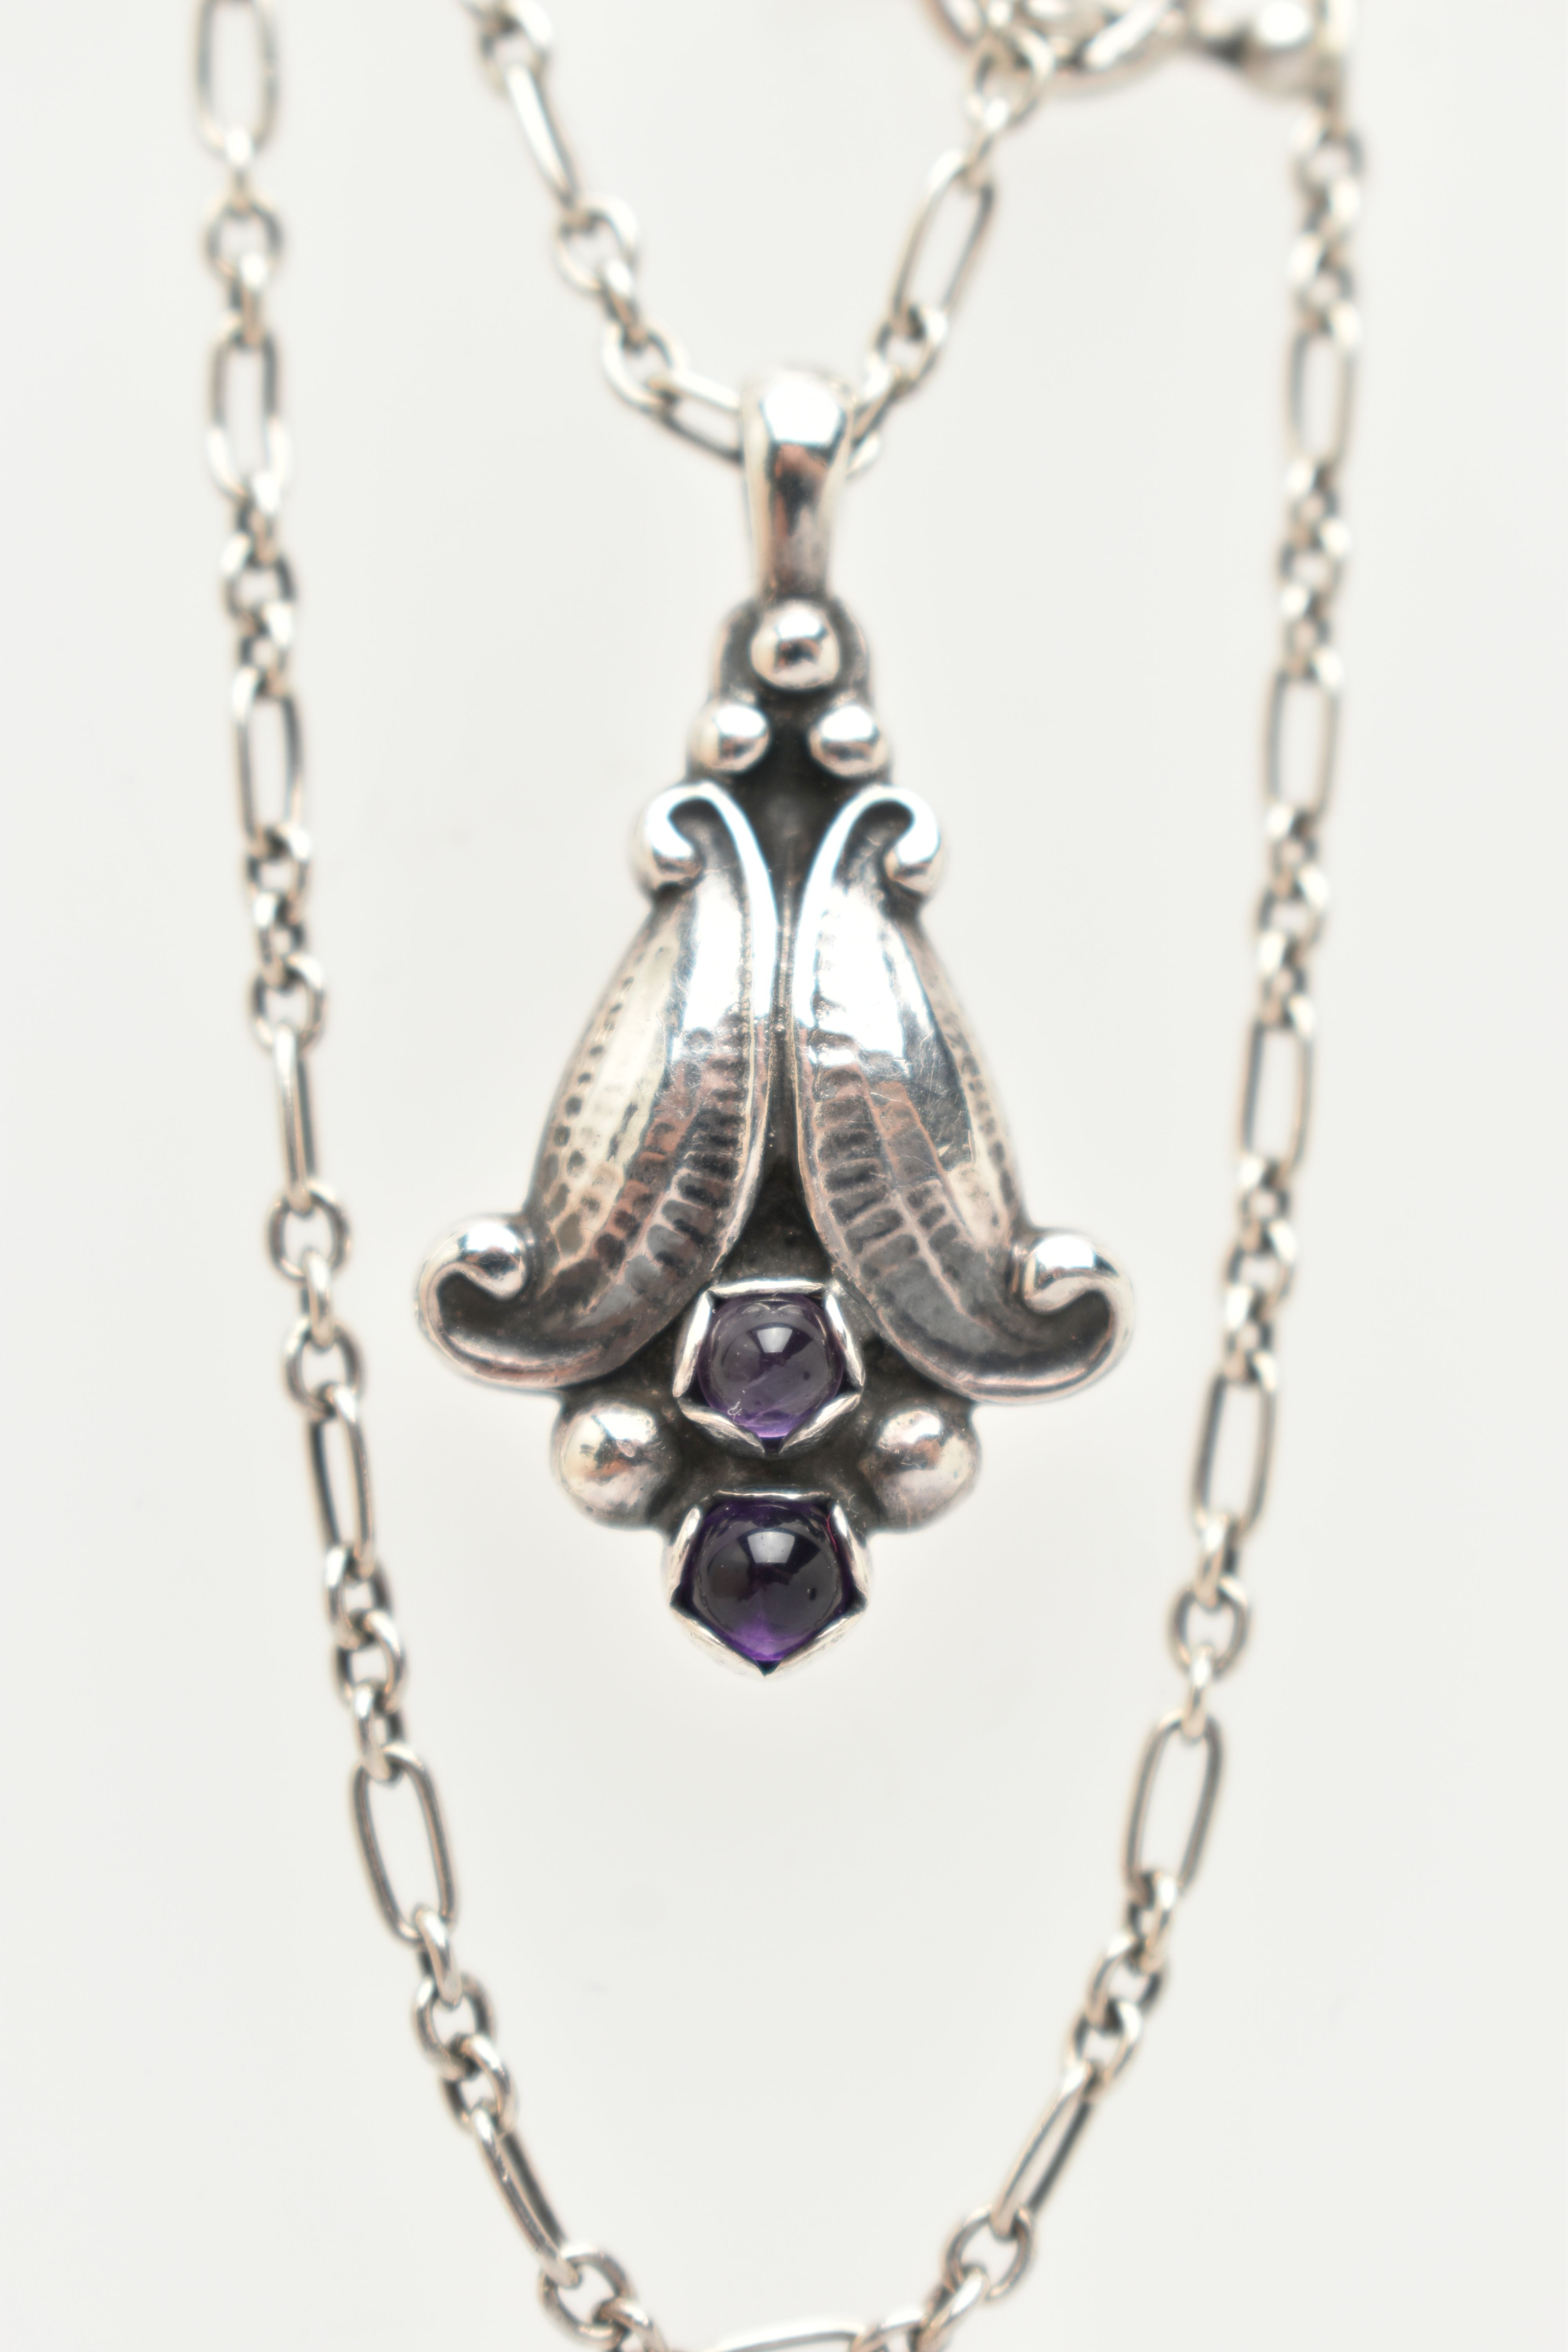 A BOXED 'GEORG JENSEN' PENDANT NECKLACE, floral drop pendant set with two amethyst dome cabochons, - Image 4 of 5